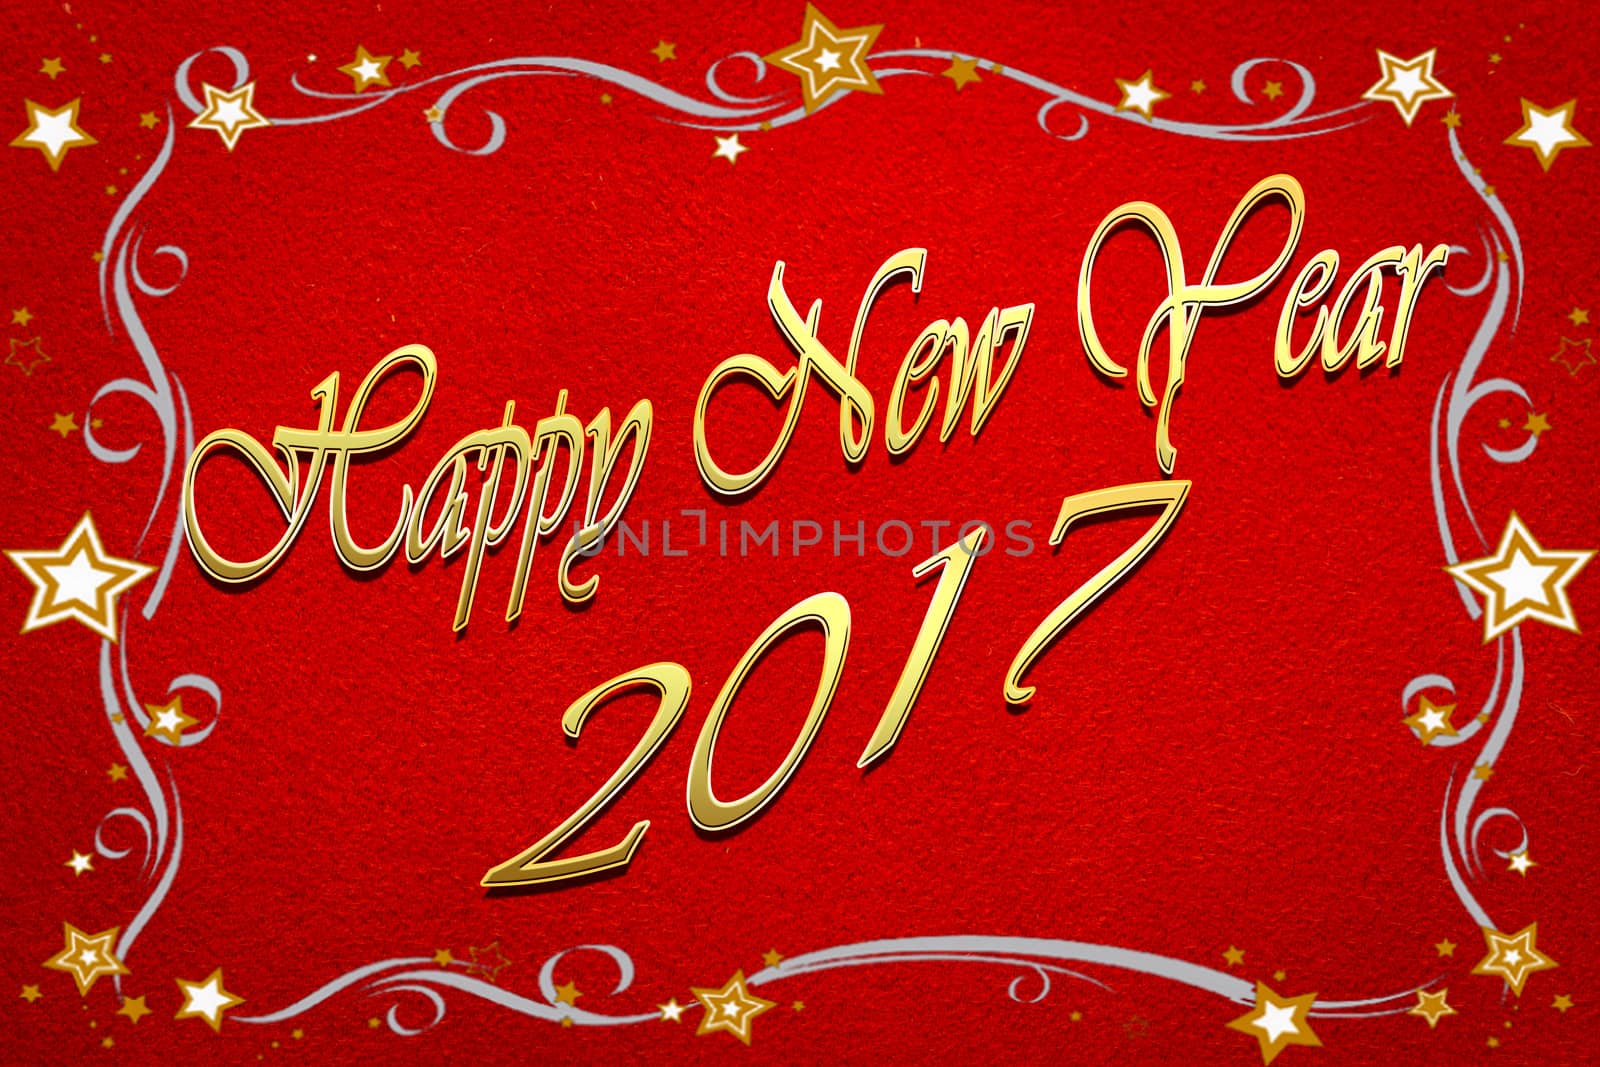 Happy new year 2017 on rustic canvas fabric texture in red color.